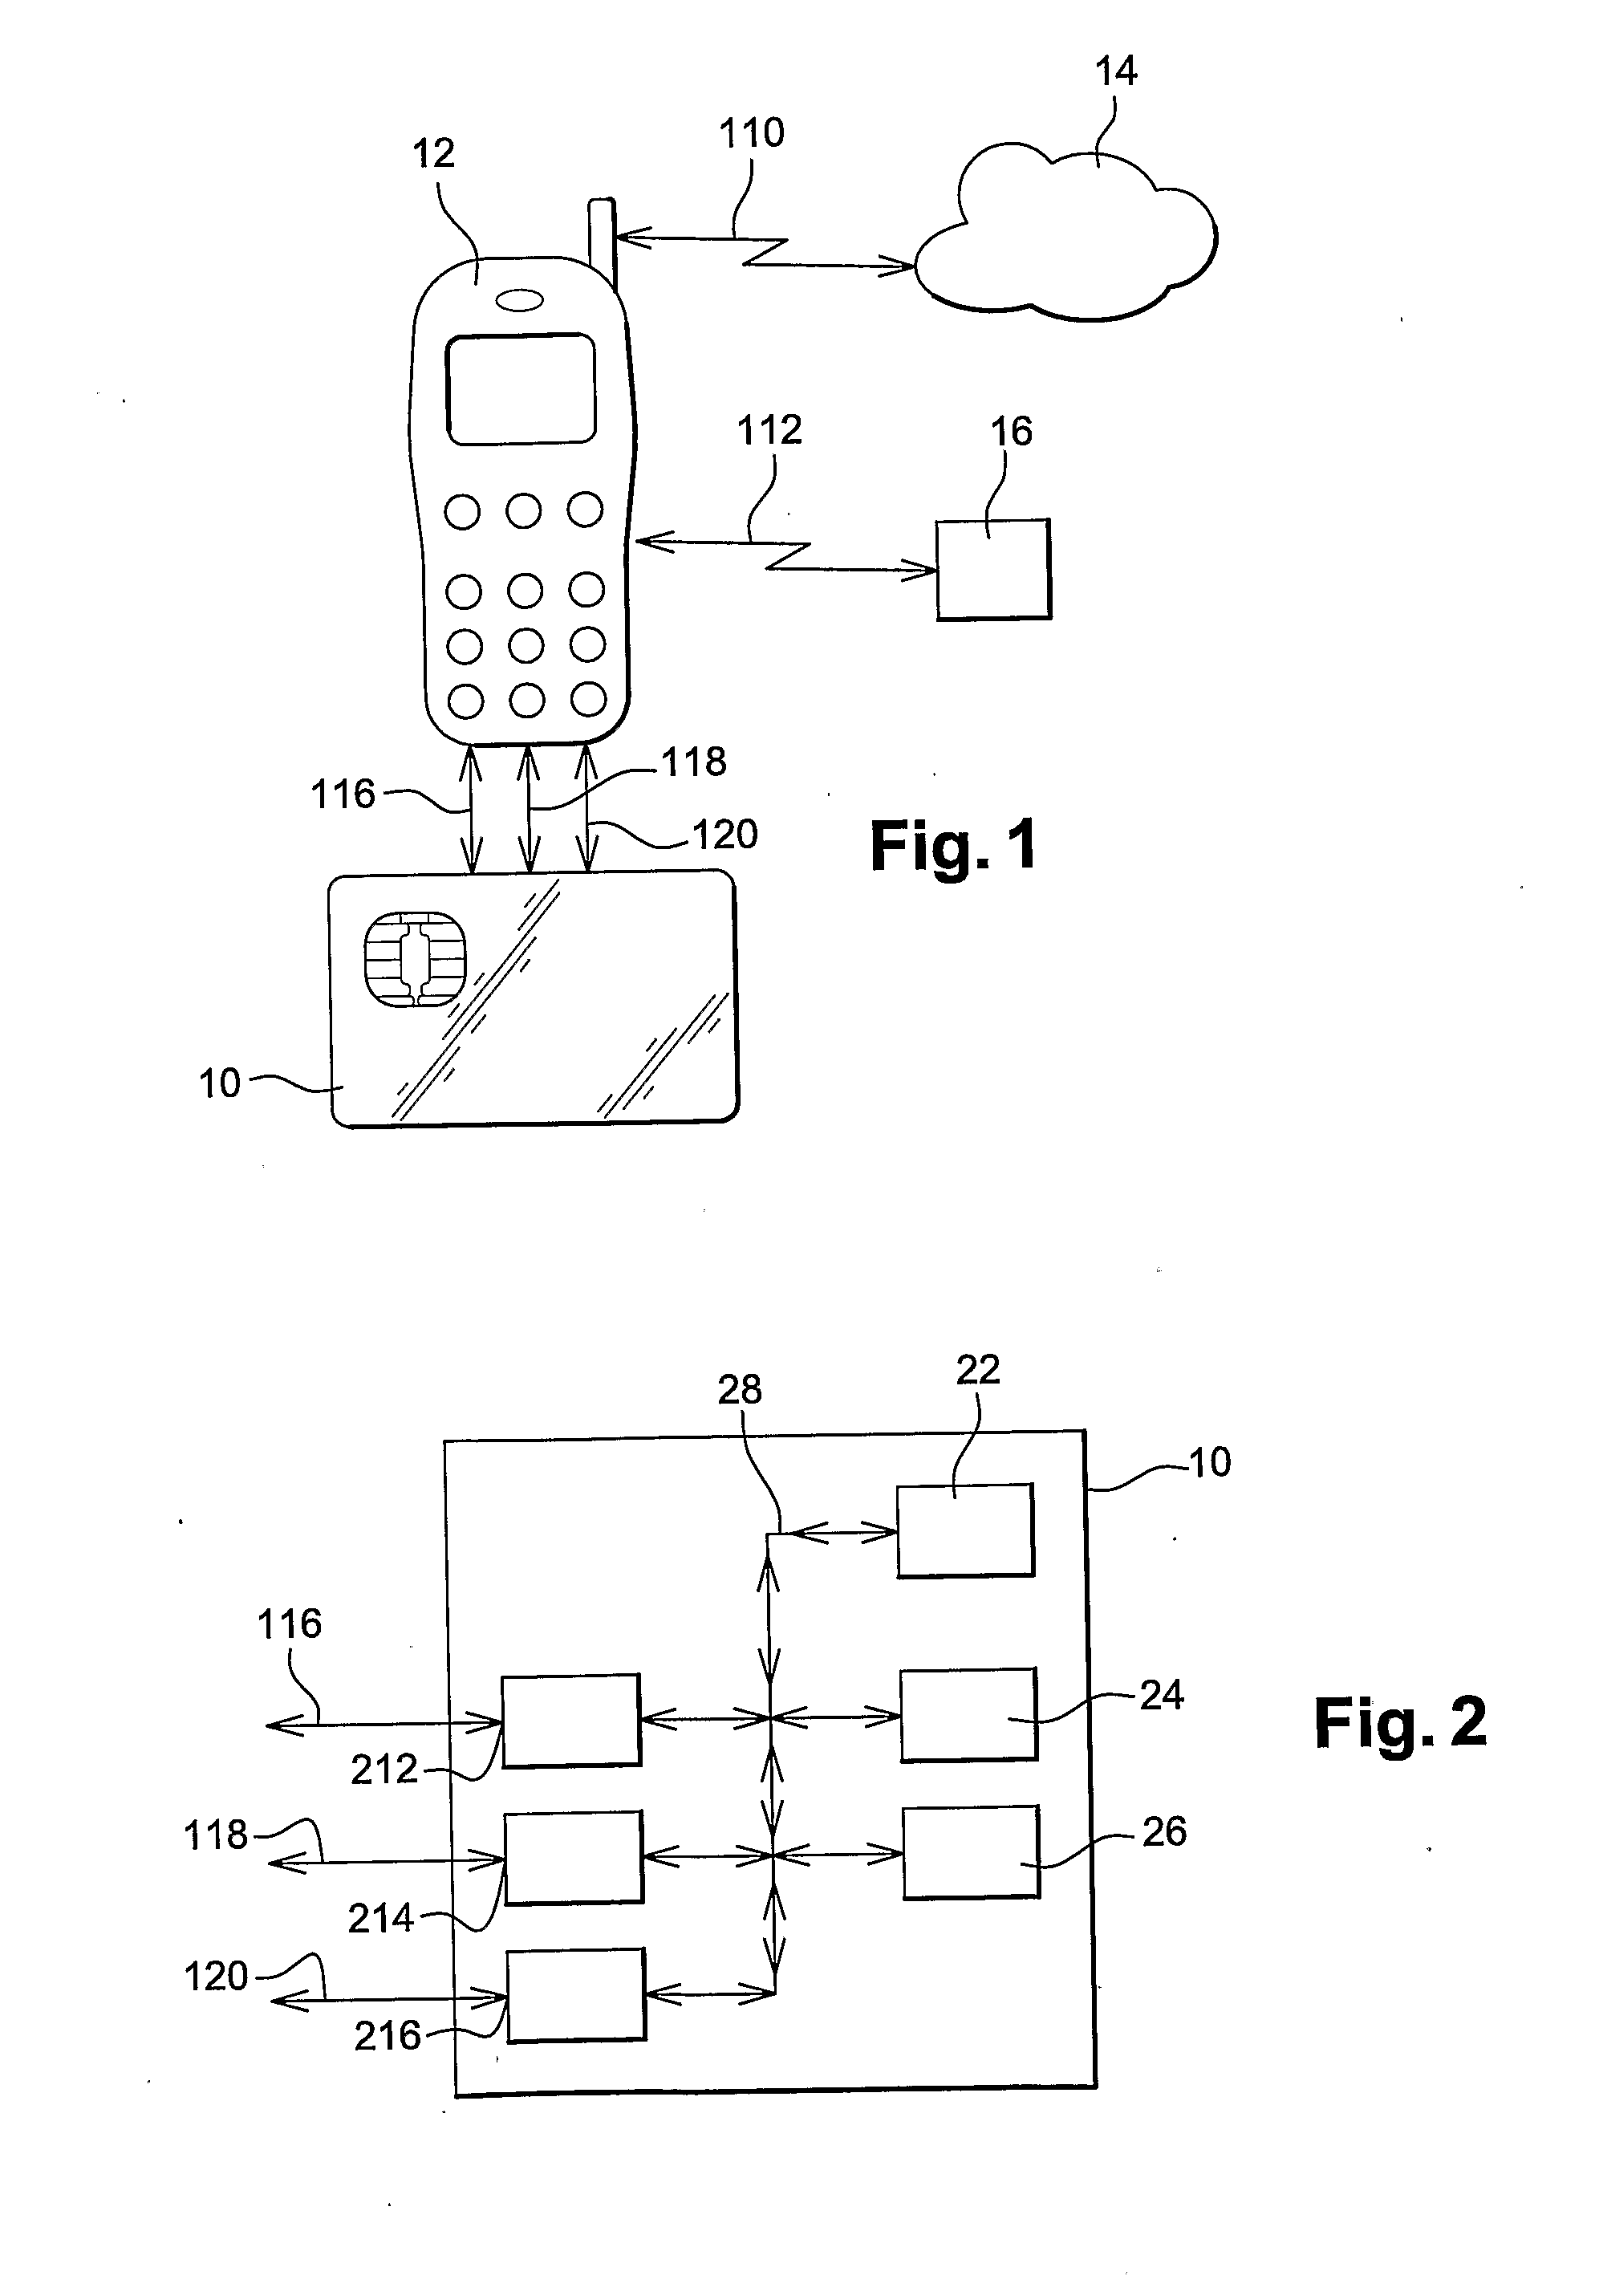 Method for processing application commands from physical channels using a portable electronic device and corresponding device and system